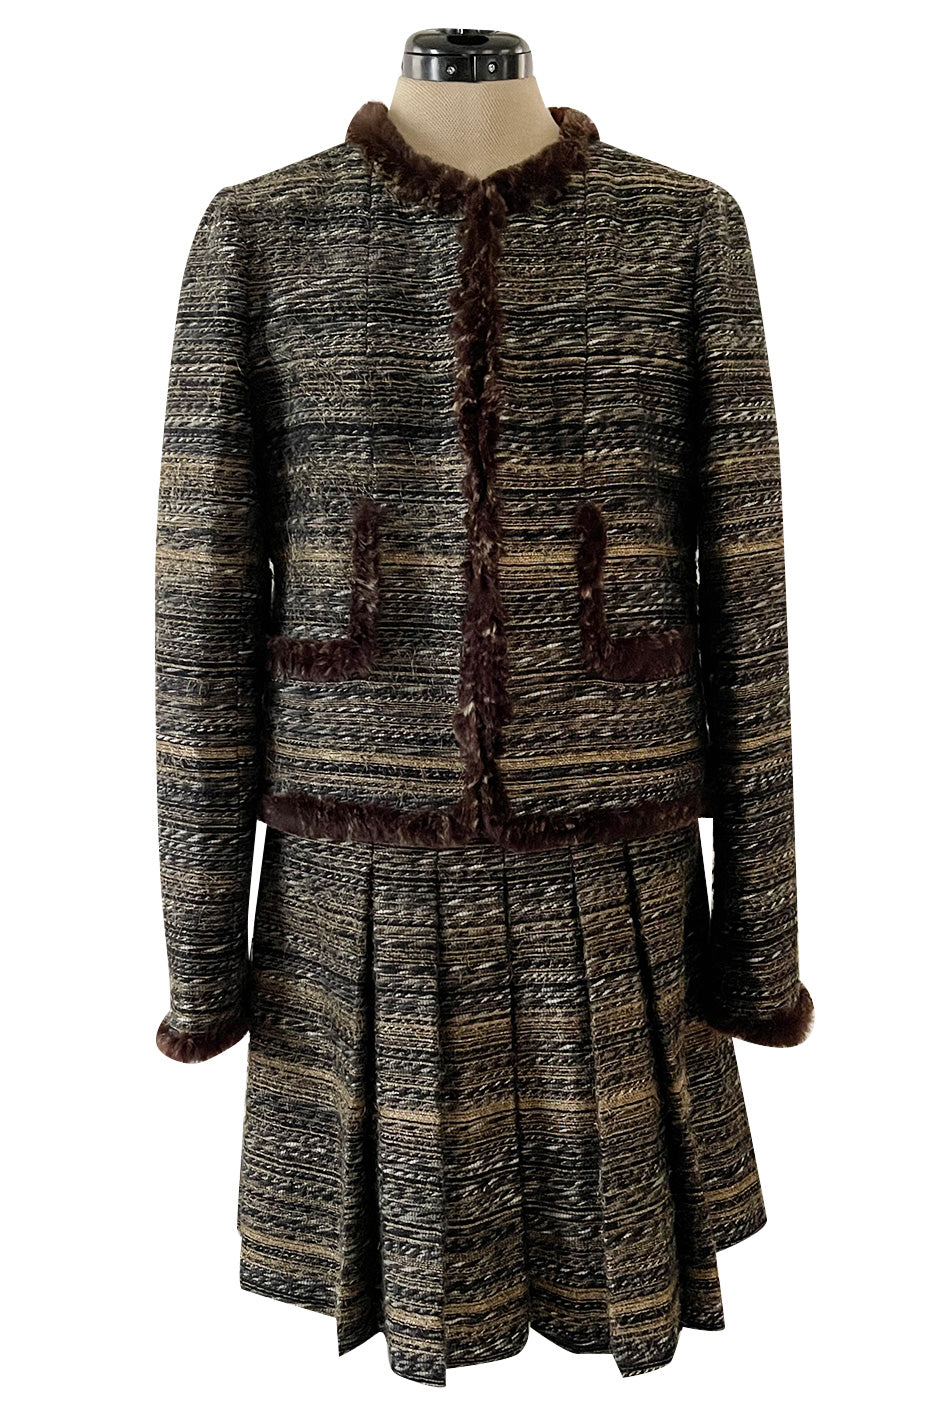 Foxy Couture Carmel Chanel 2005 Fantasy Tweed Suit Jacket and Skirt